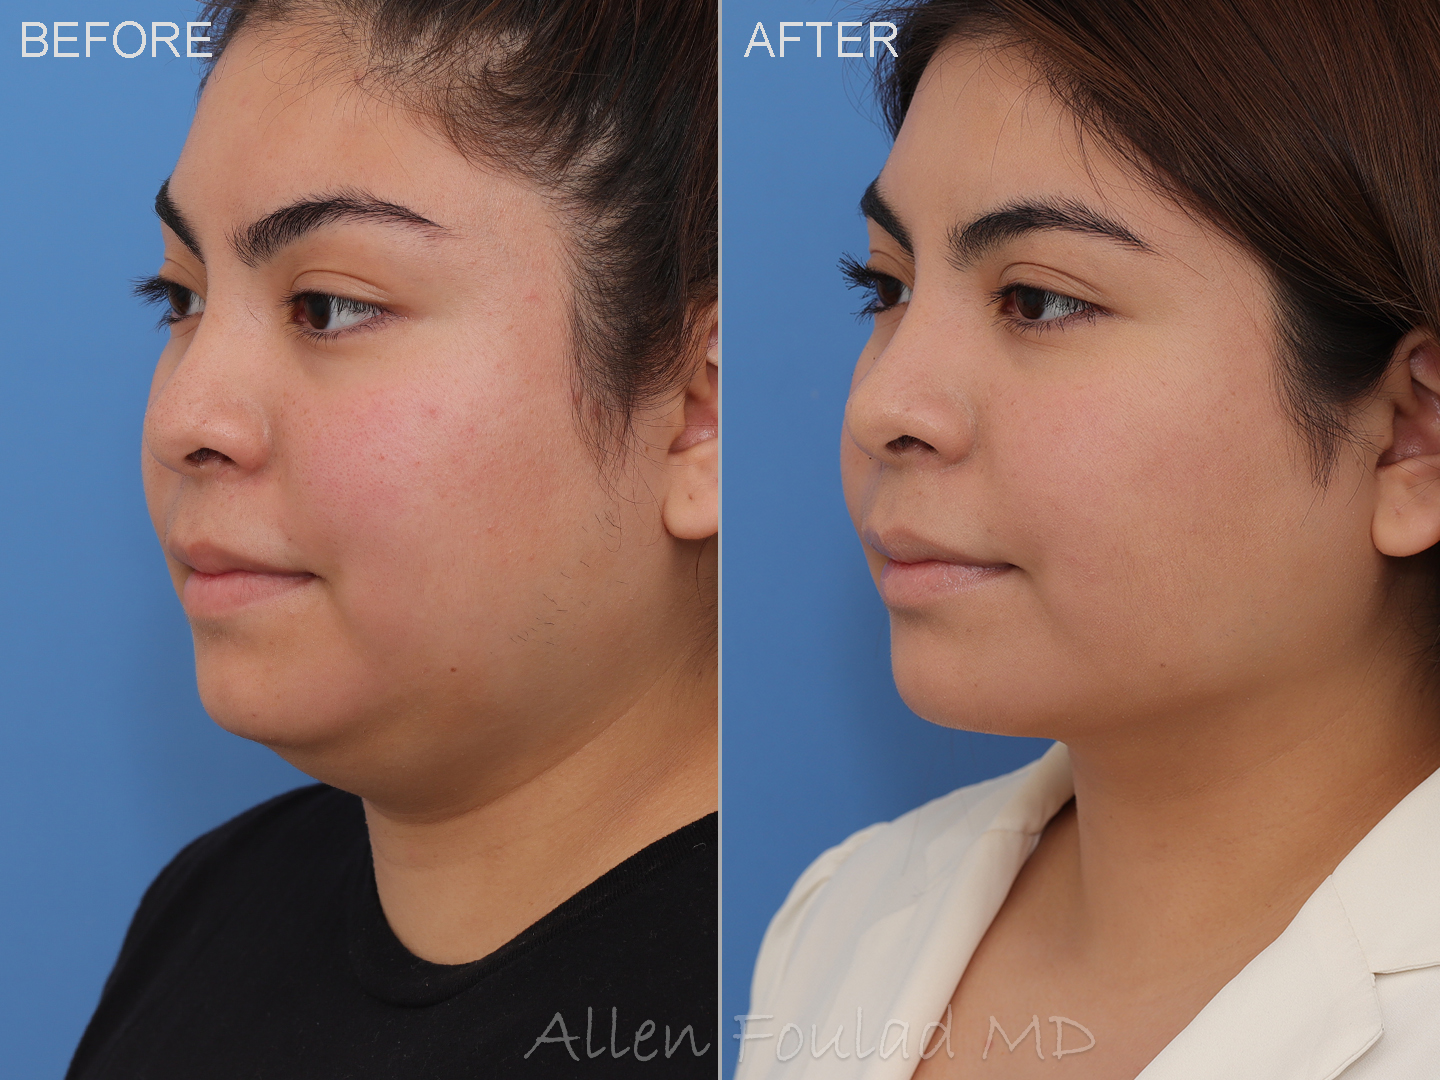 Before and after neck and lower face liposuction and buccal fat pad reduction in young woman. Jawline definition improved and double chin gone.